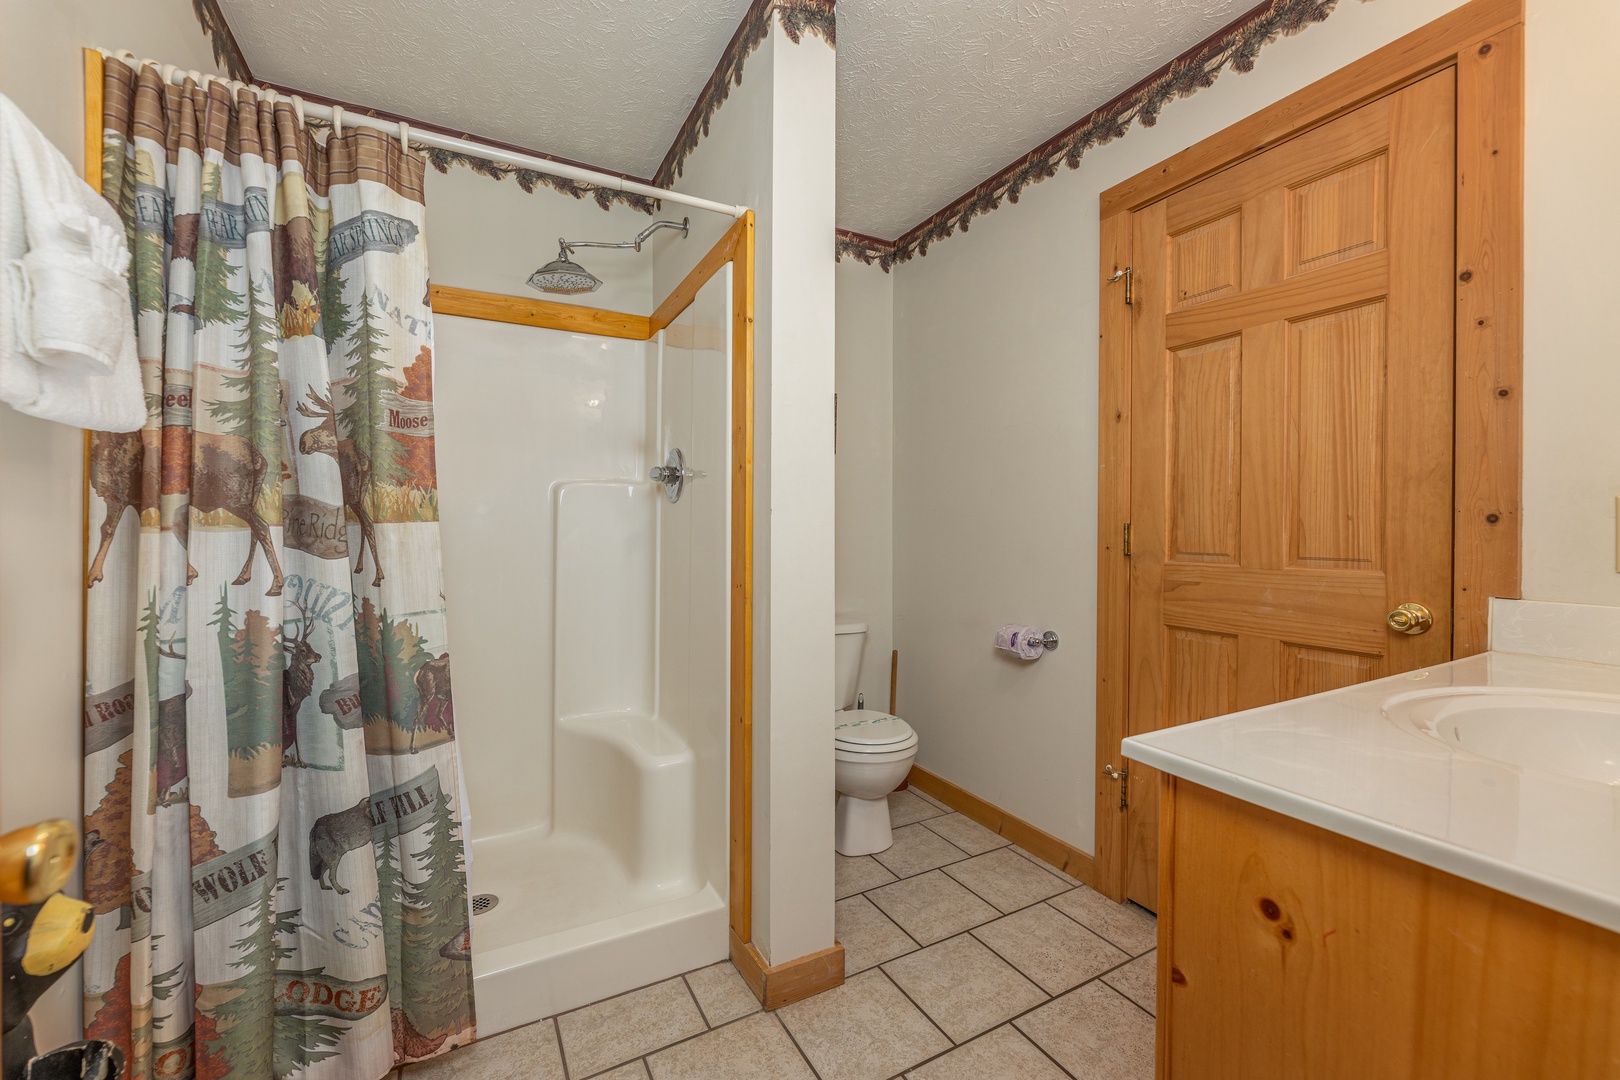 Bathroom with a walk in shower at Cub's Crossing, a 3 bedroom cabin rental located in Gatlinburg